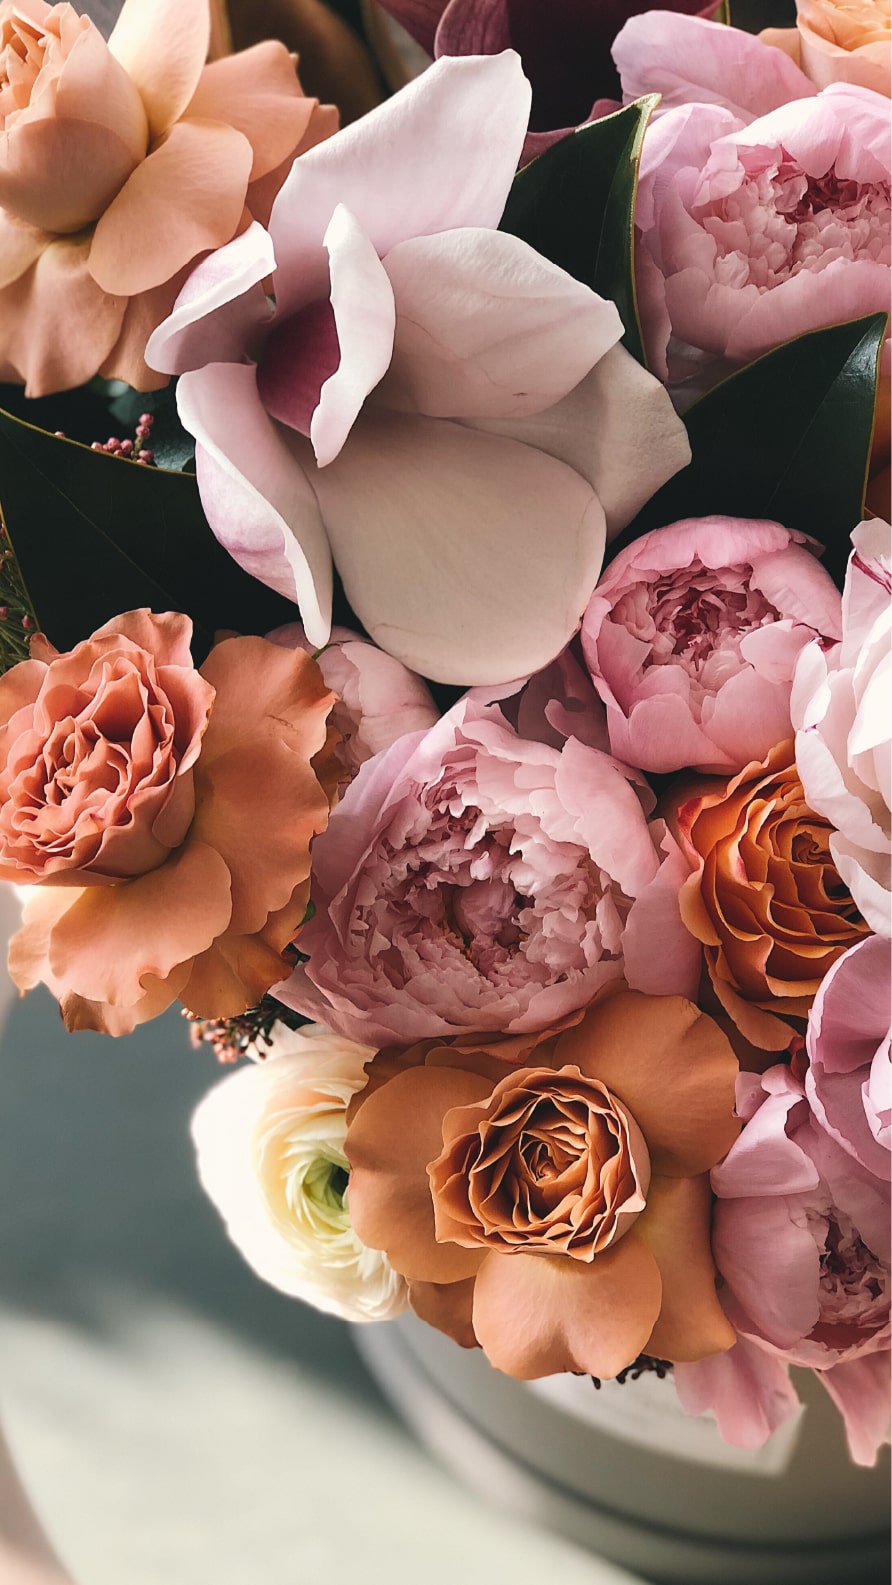 iPhone wallpapers featuring flowers